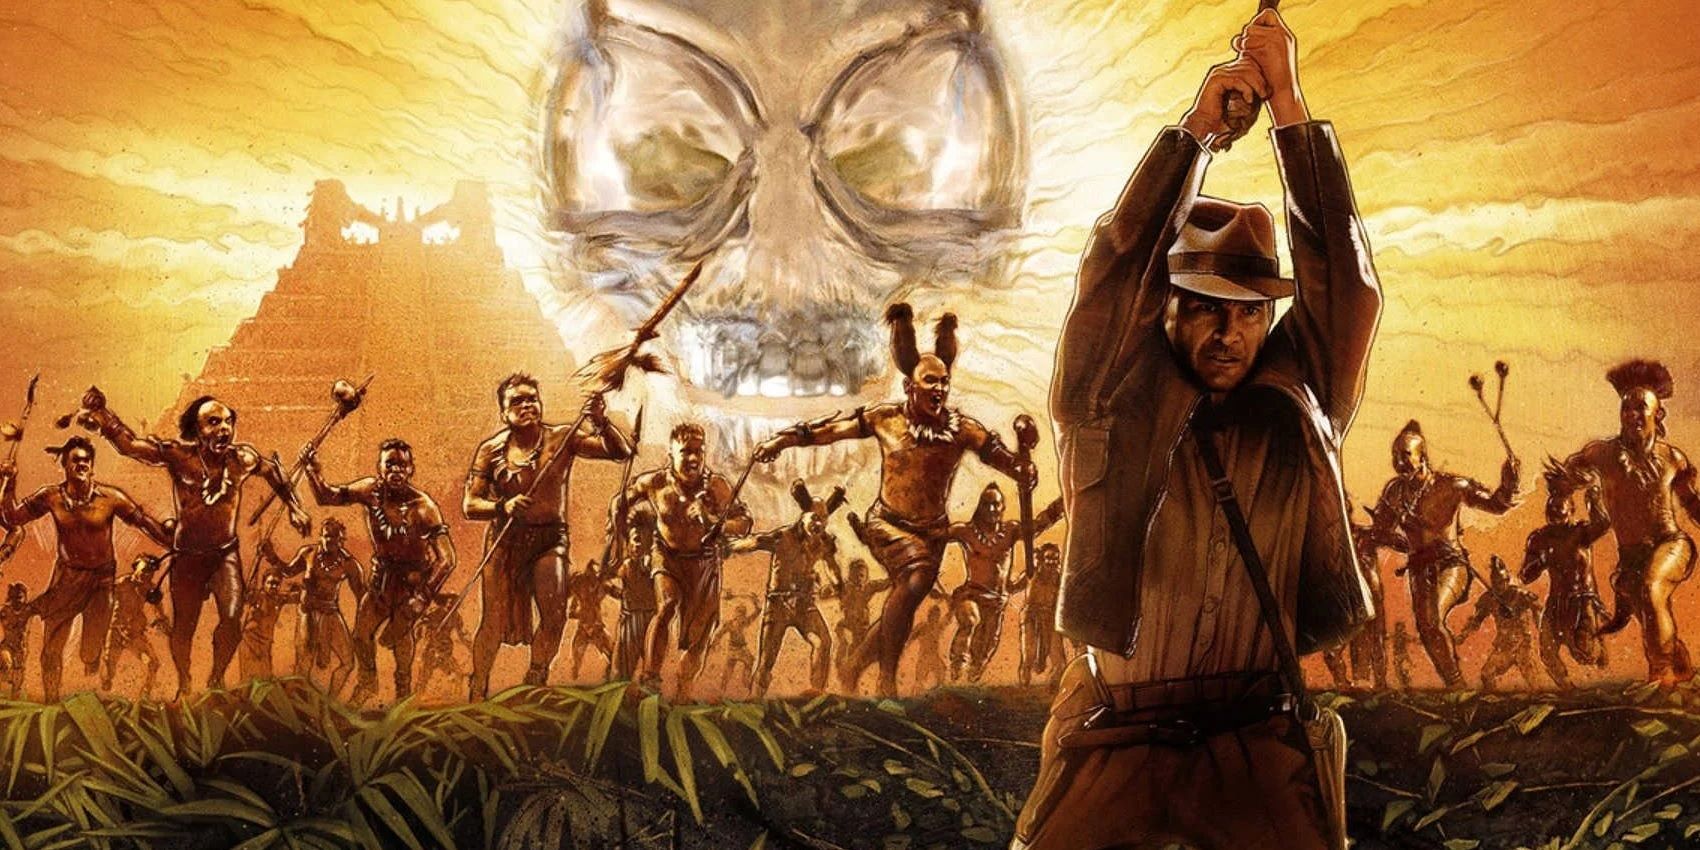 Indiana Jones and the Kingdom of the Crystal Skull poster